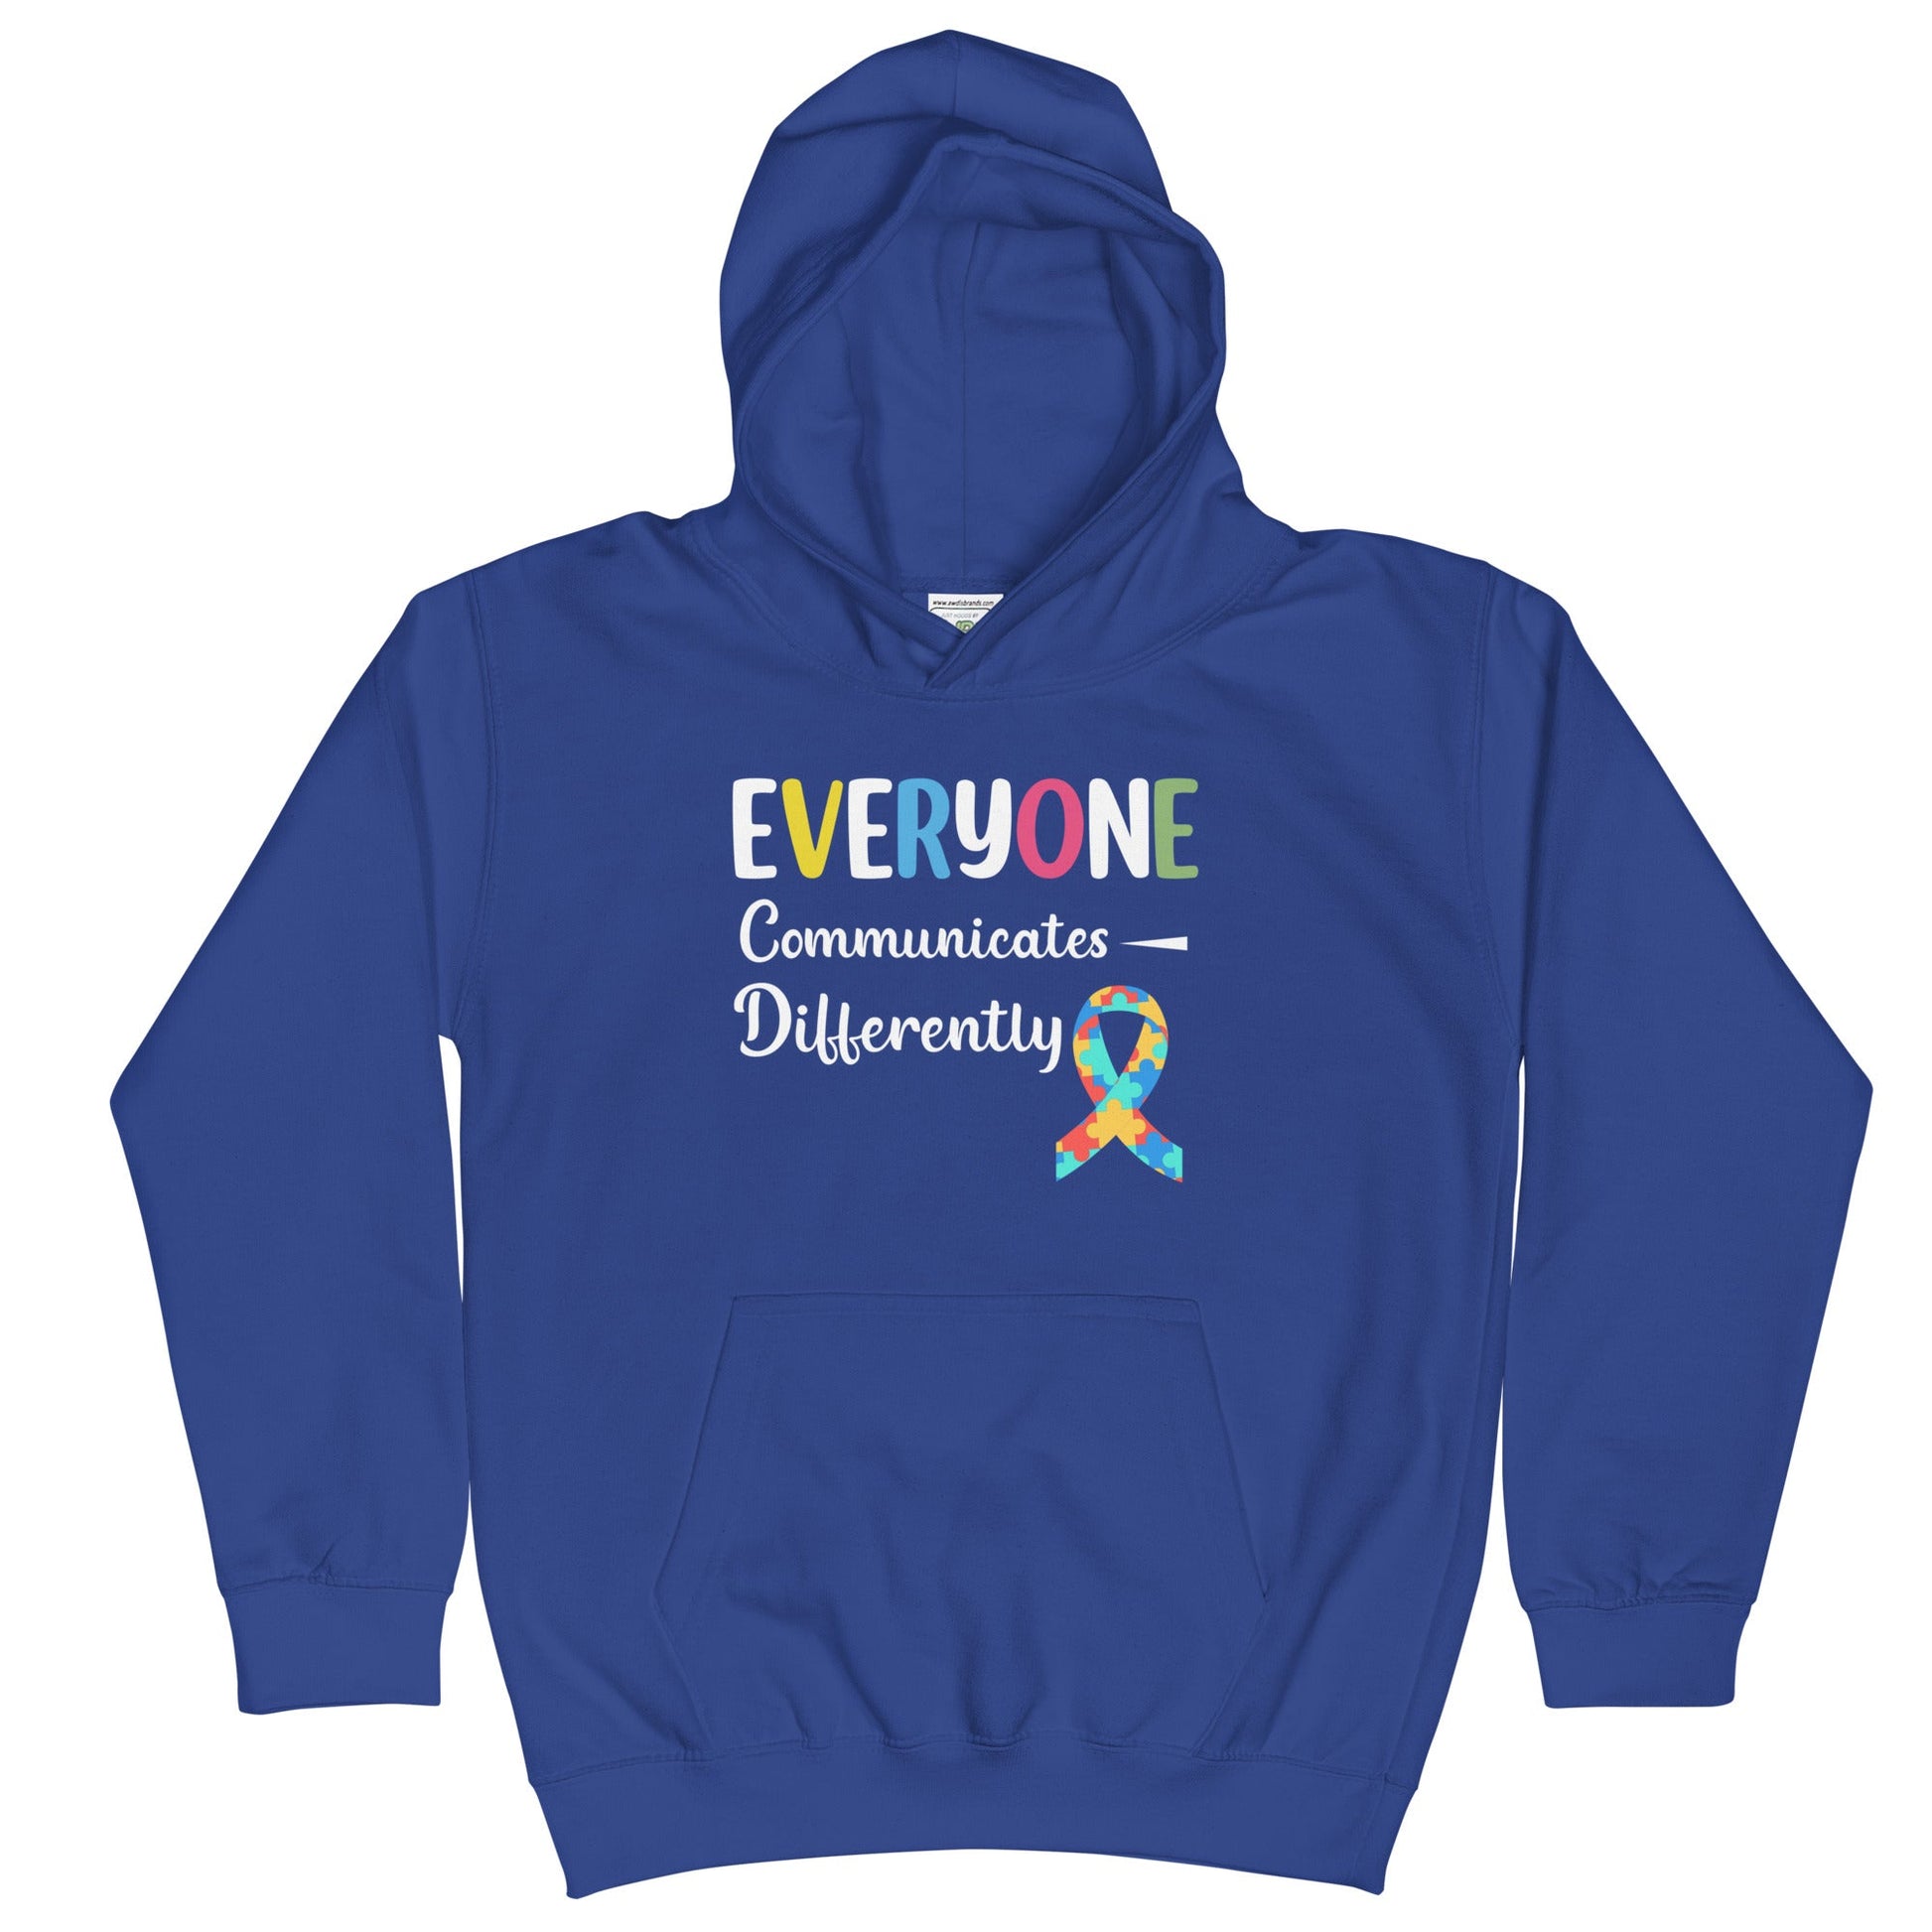 Everyone Communicates Differently Kids Hoodie - Uniquely Included